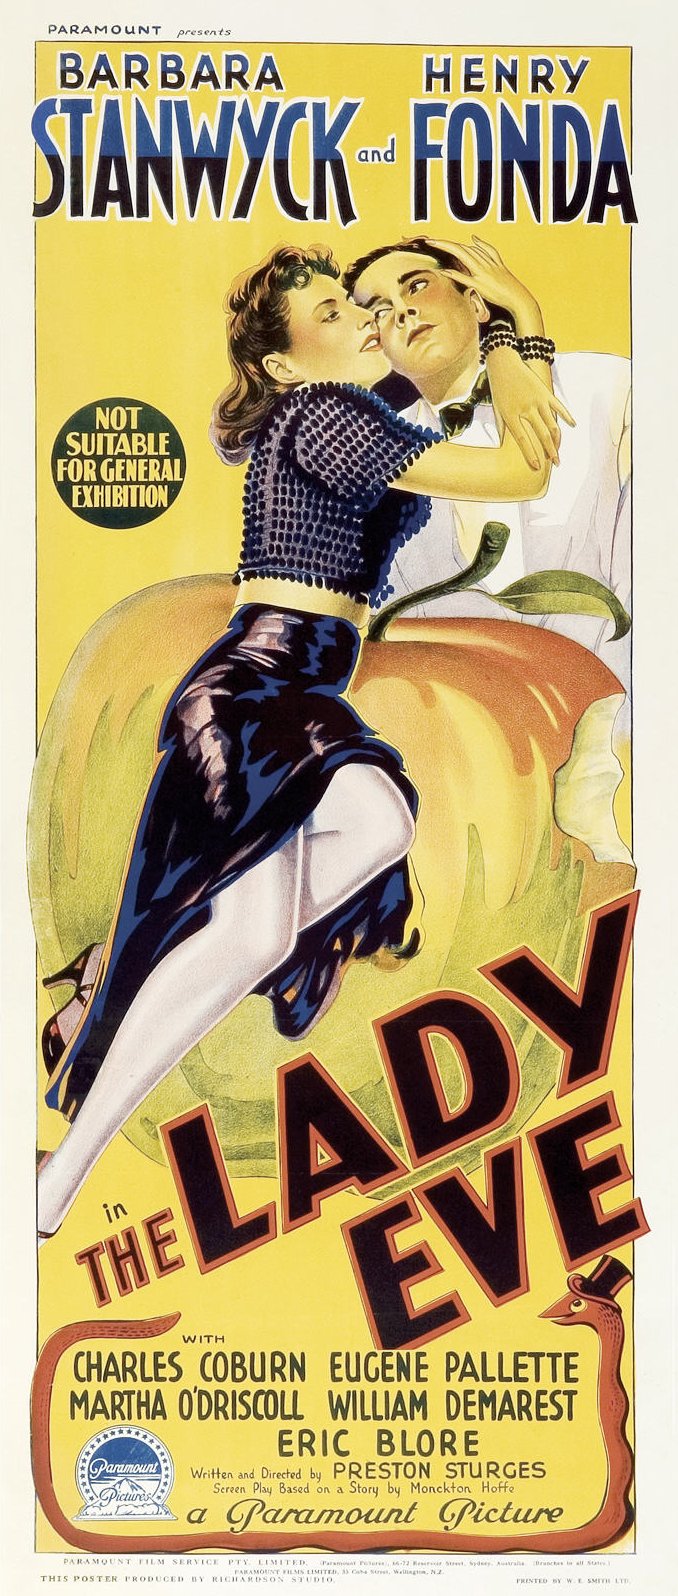 Happyotter: THE LADY EVE (1941)